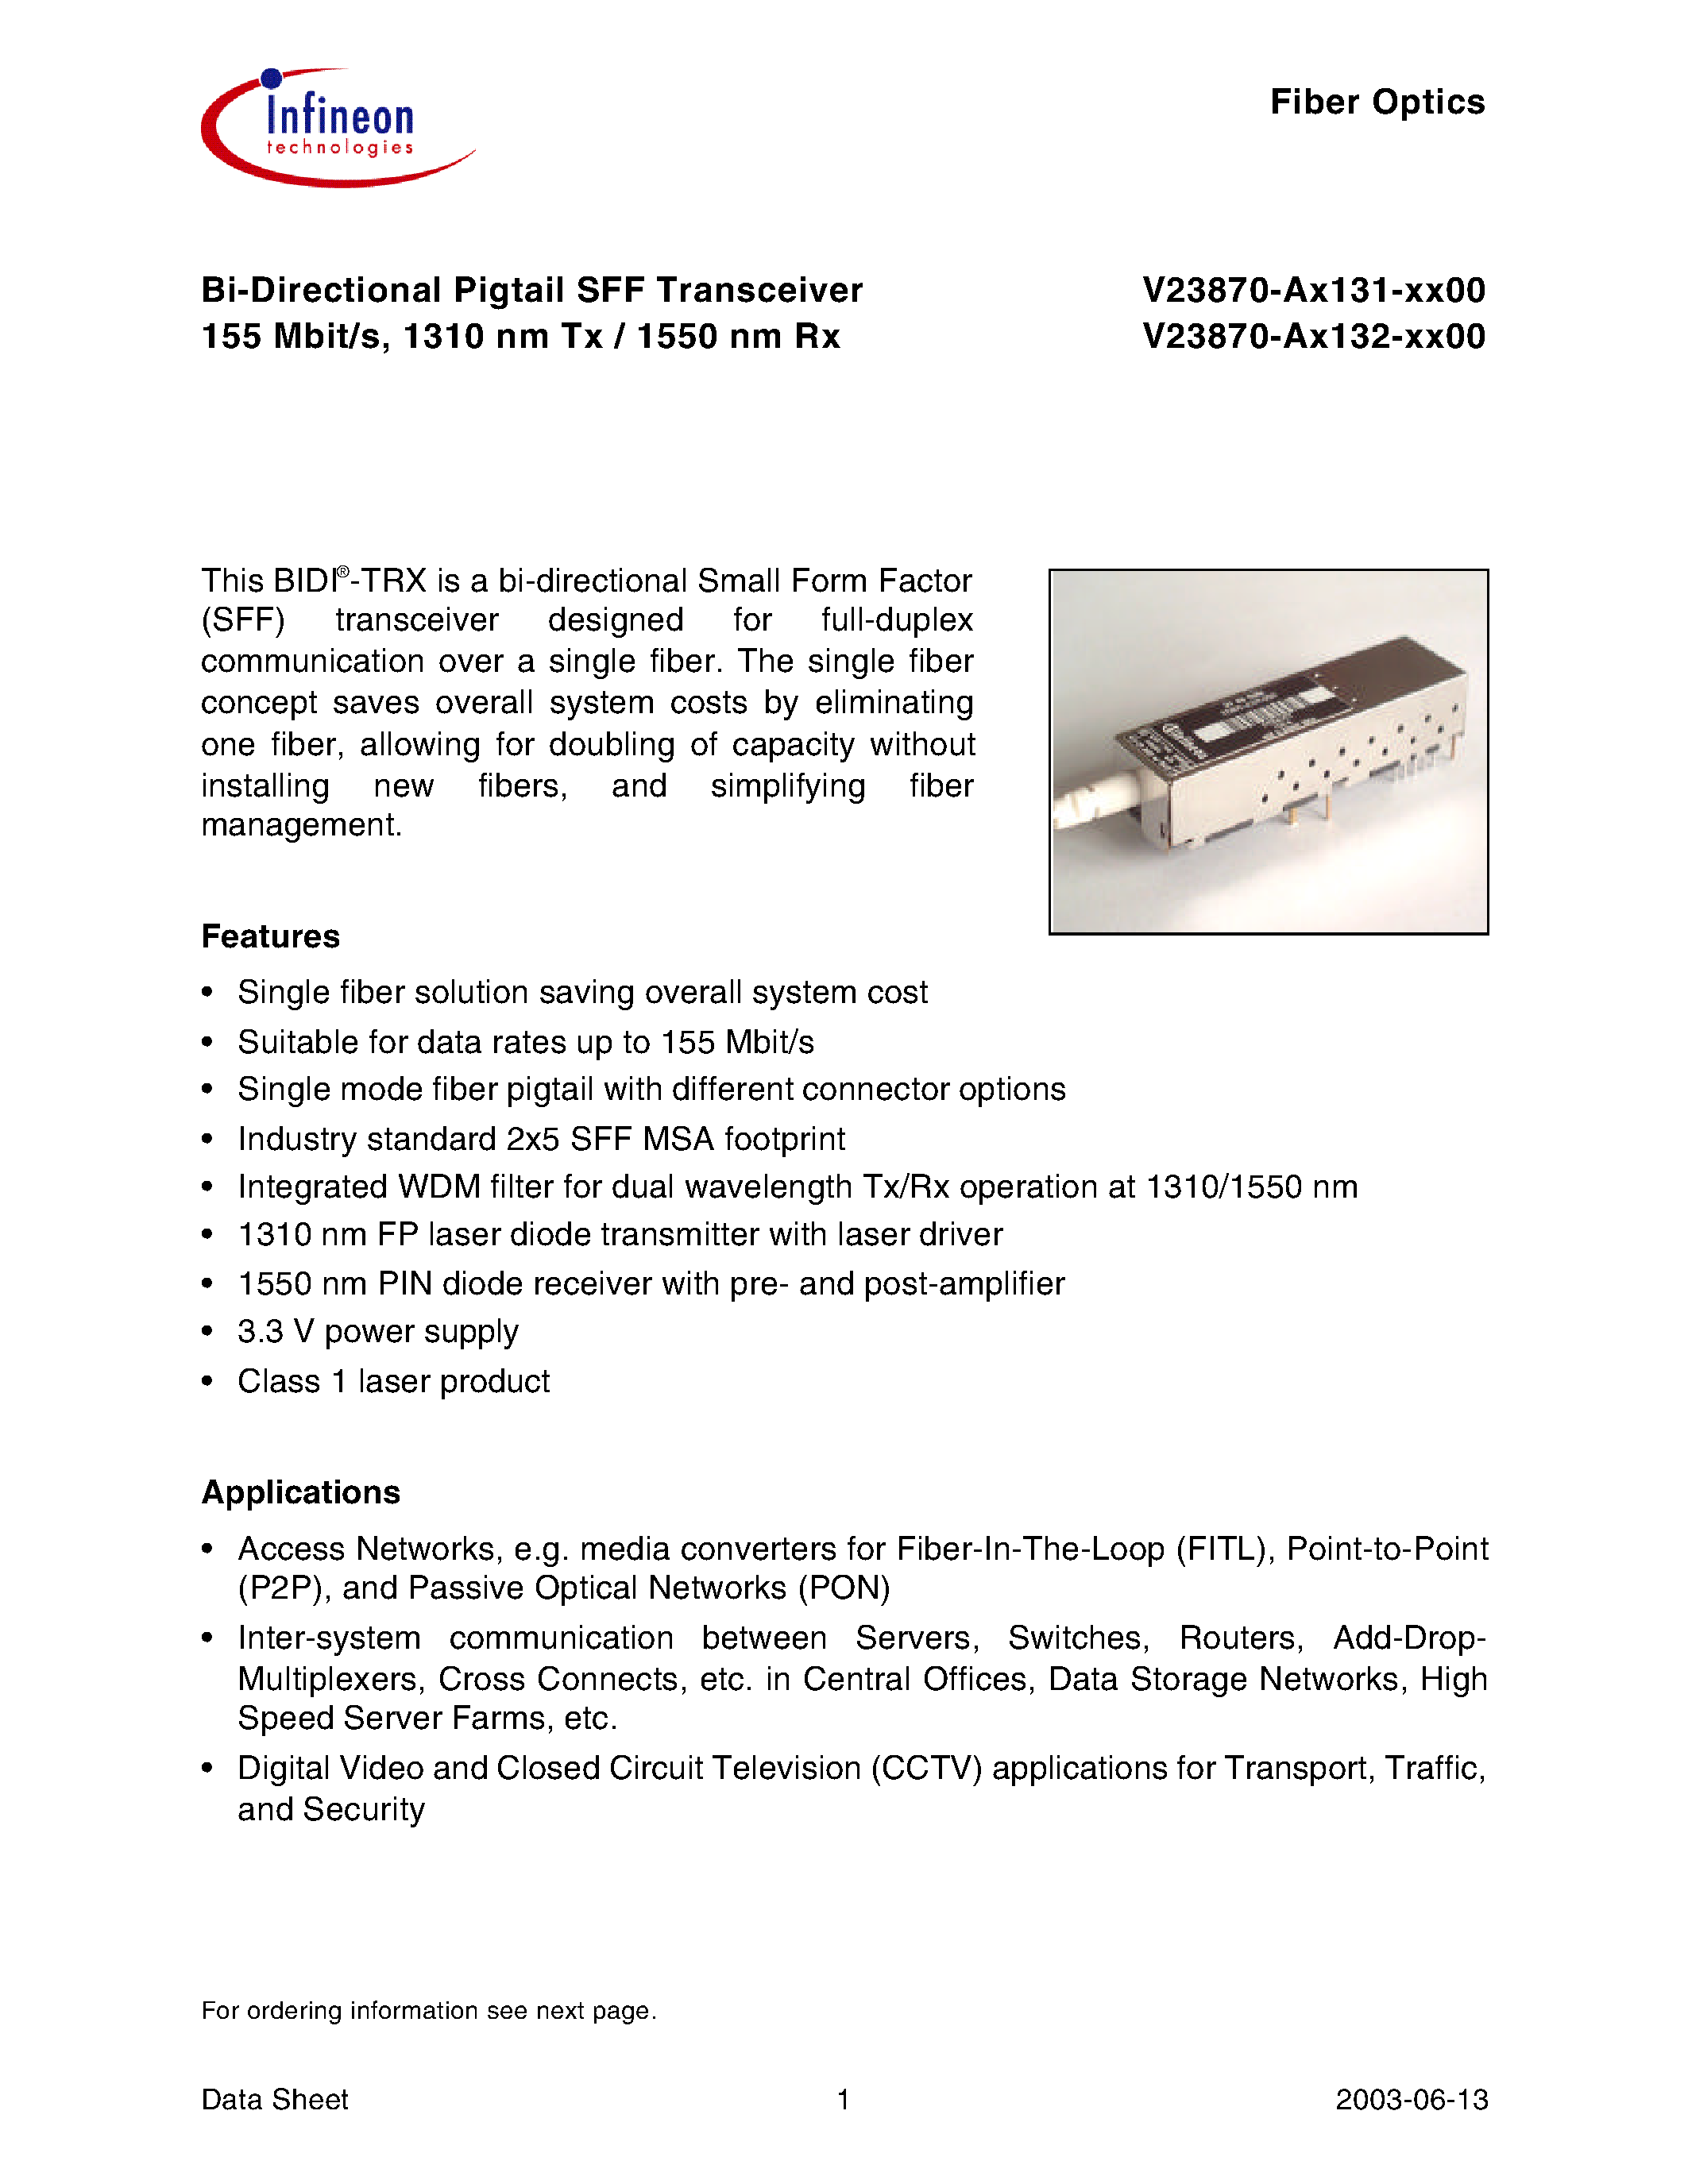 Datasheet V23870-A1131-H500 - Bi-Directional Pigtail SFF Transceiver 155 Mbit/s/ 1310 nm Tx / 1550 nm Rx page 1